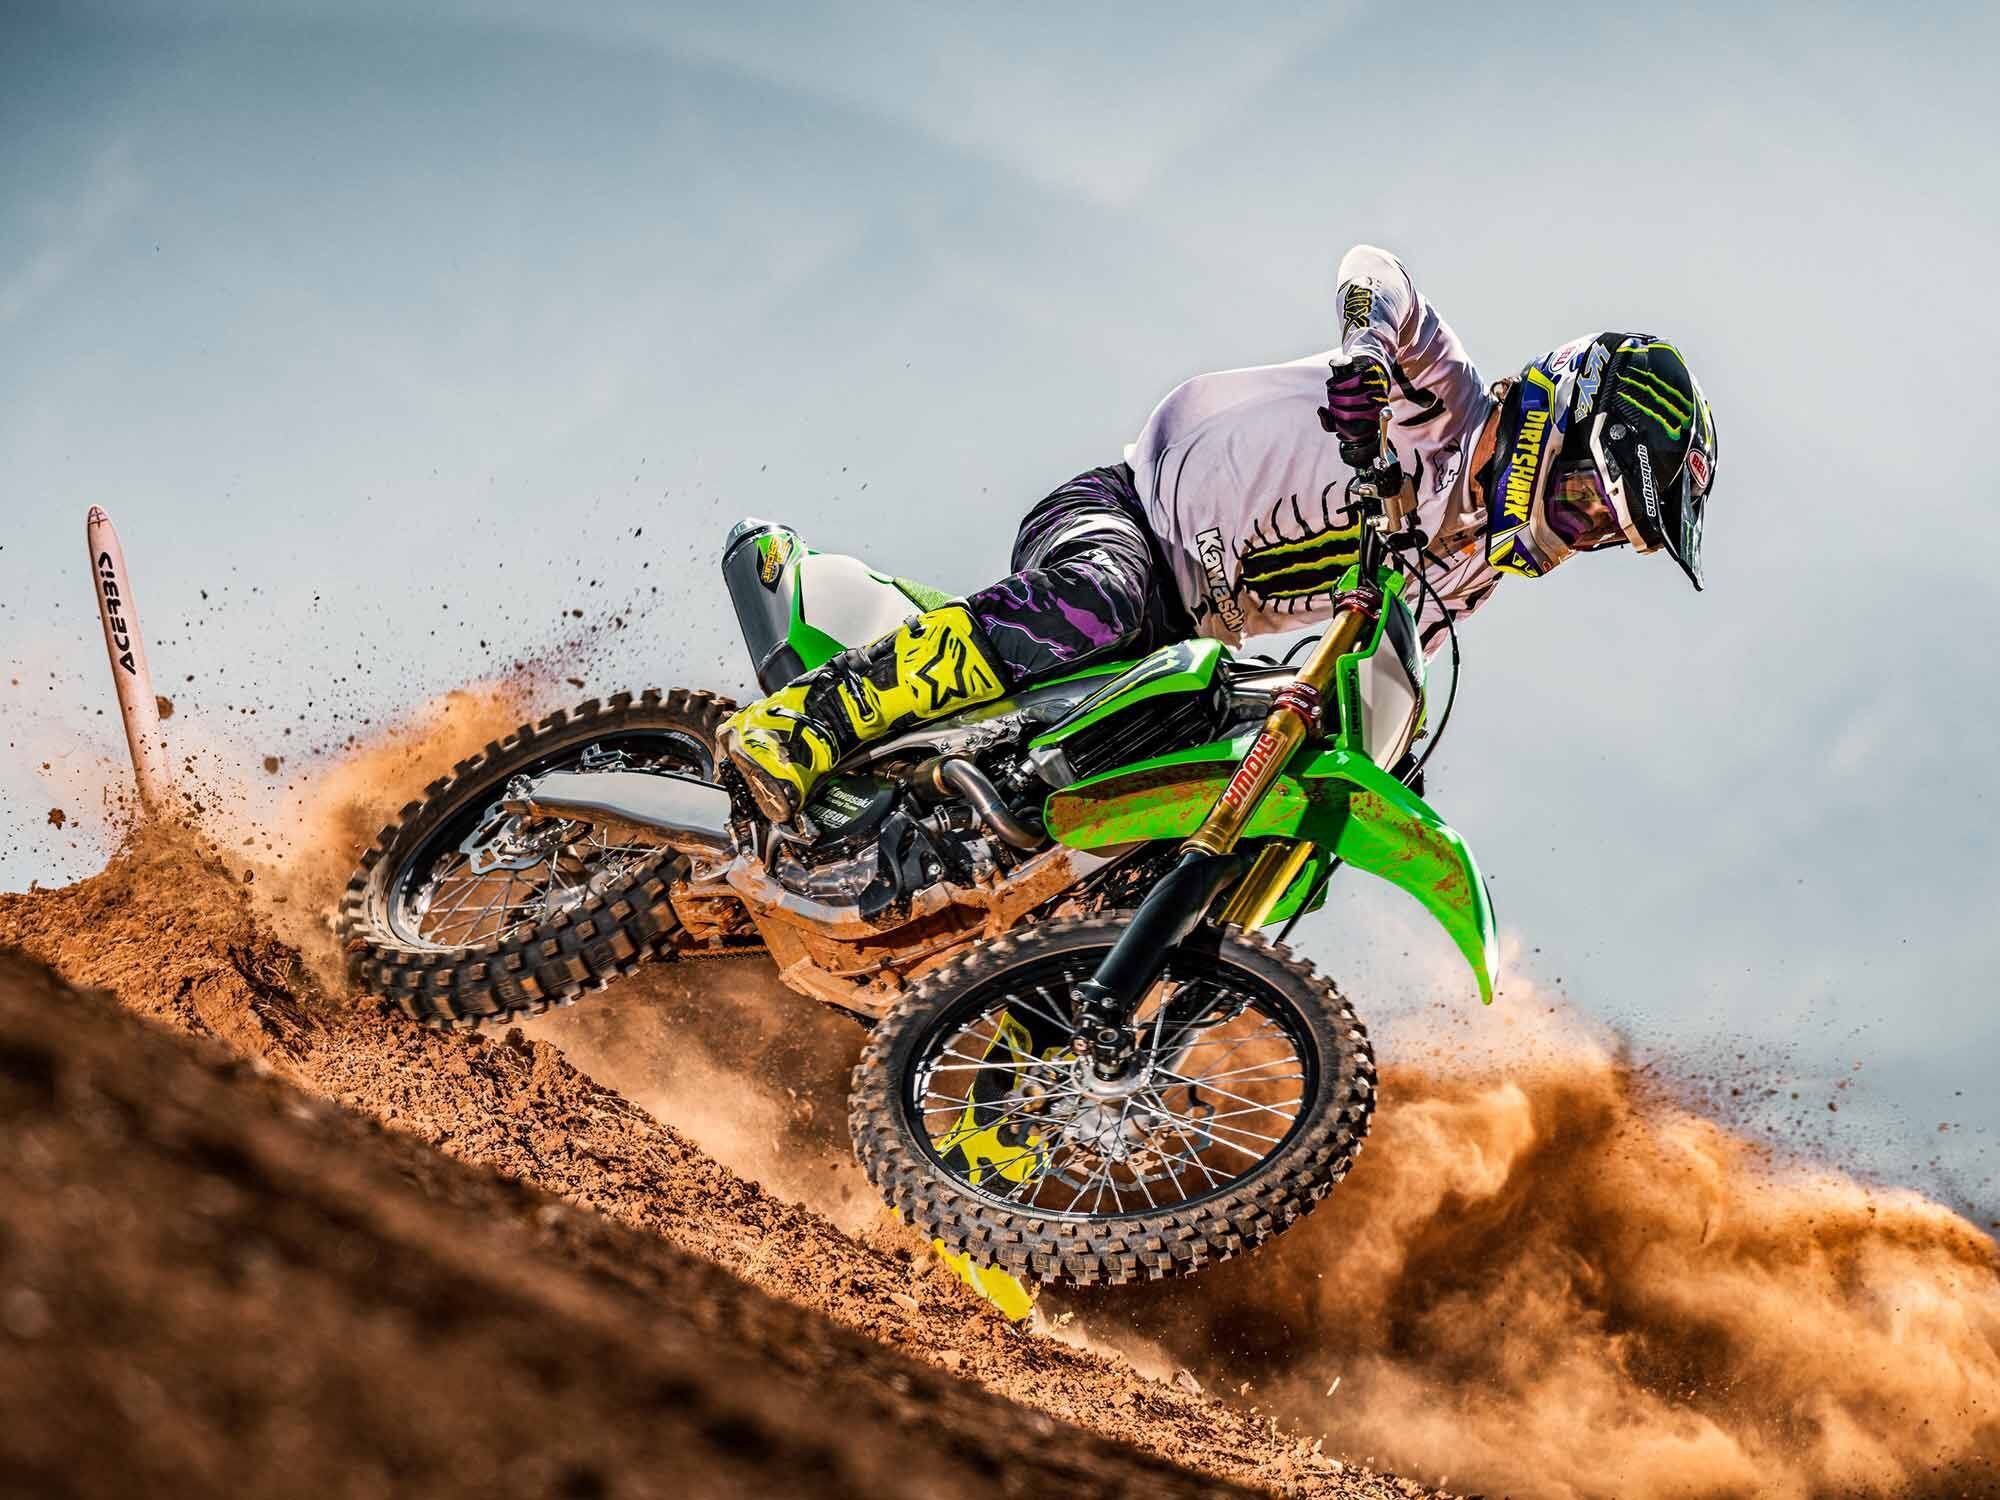 From the 2022 Monster Energy Kawasaki race team to the people: The 2023 Kawasaki KX450SR enters its second year as a factory-level production dirt bike.